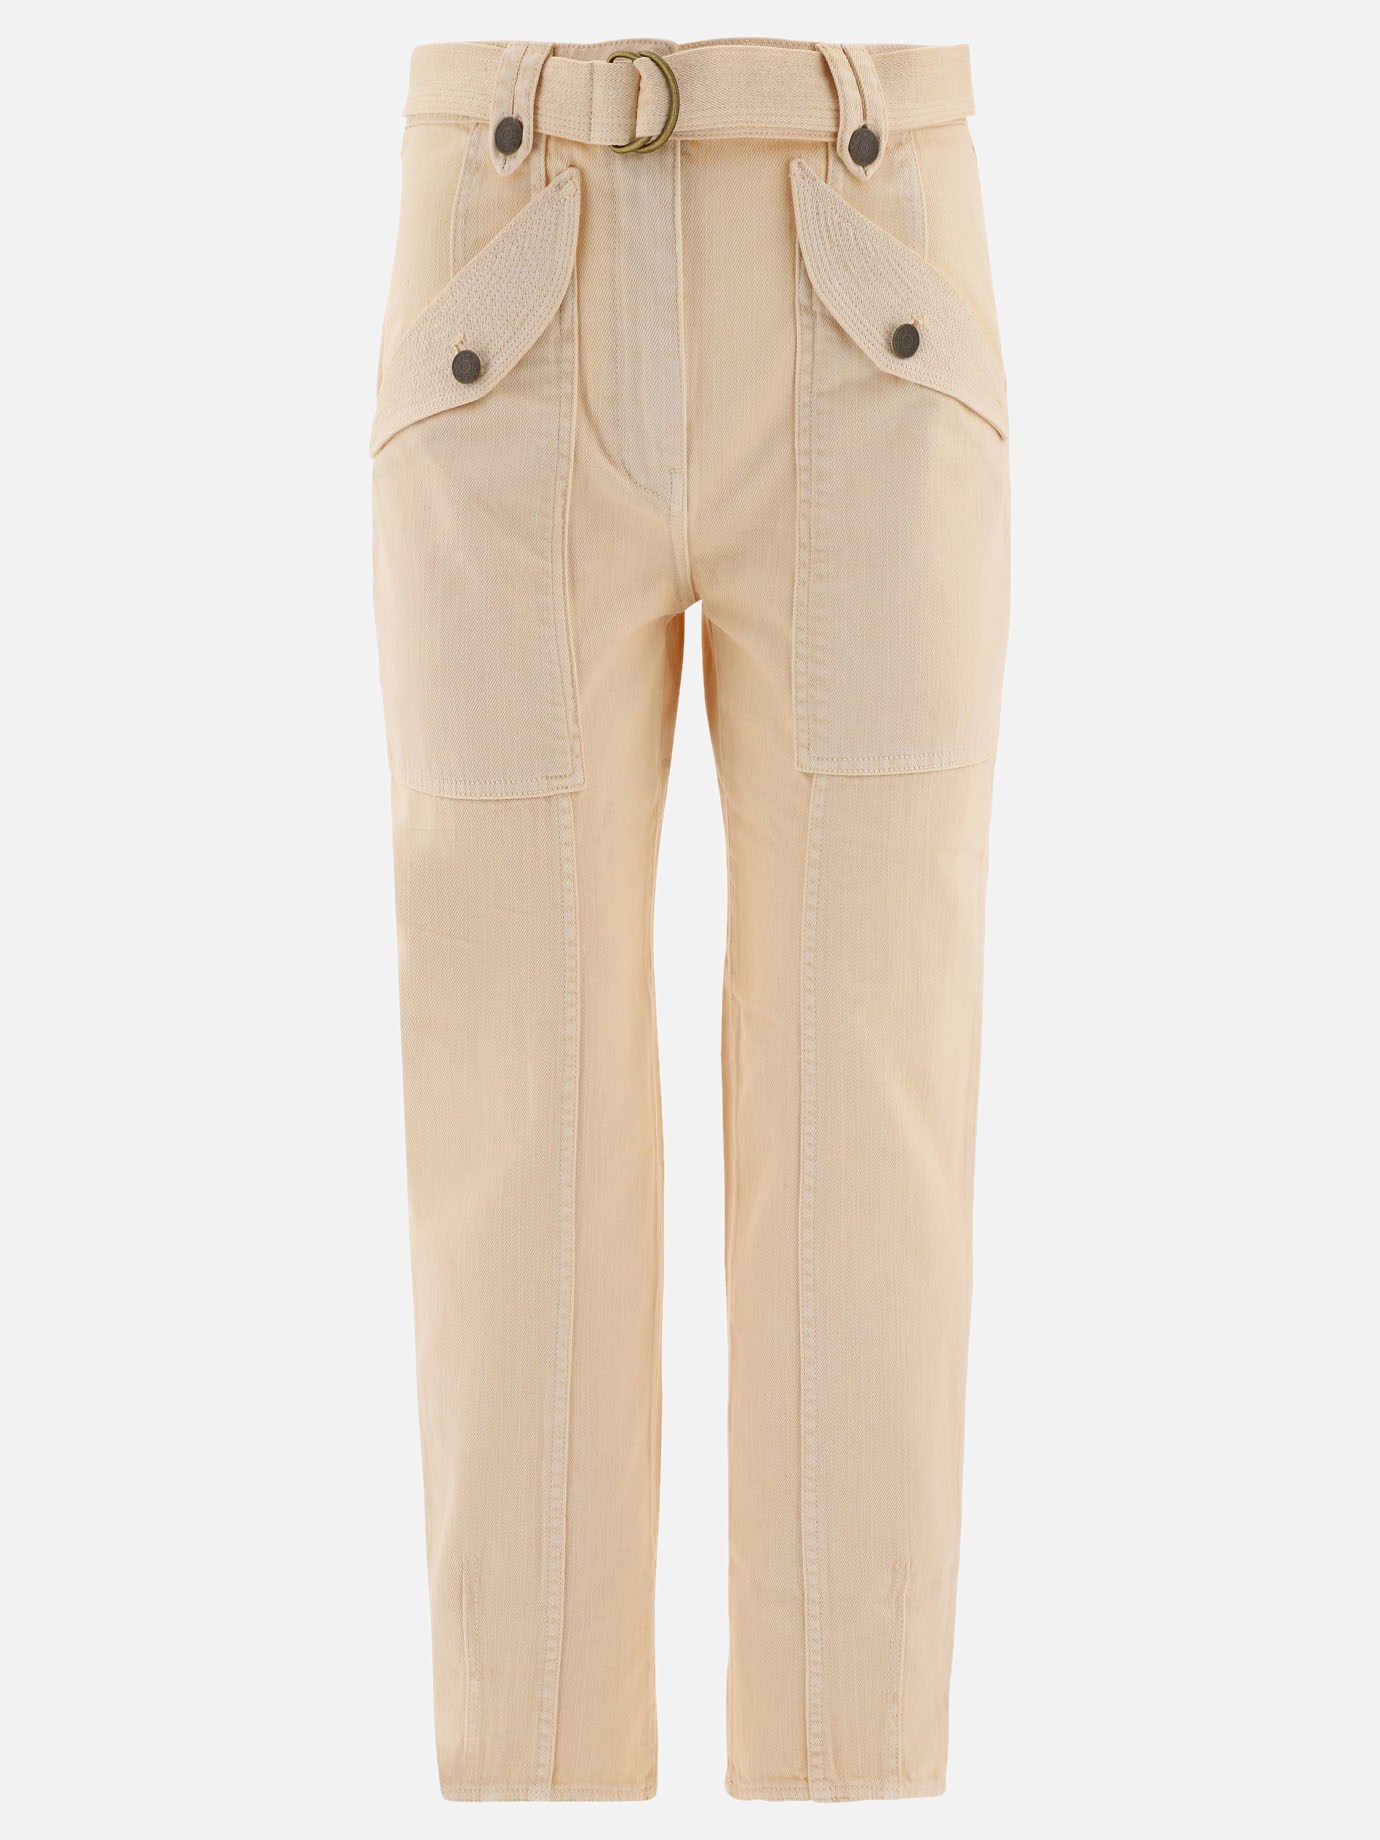  Waverly  trousers by Ulla Johnson